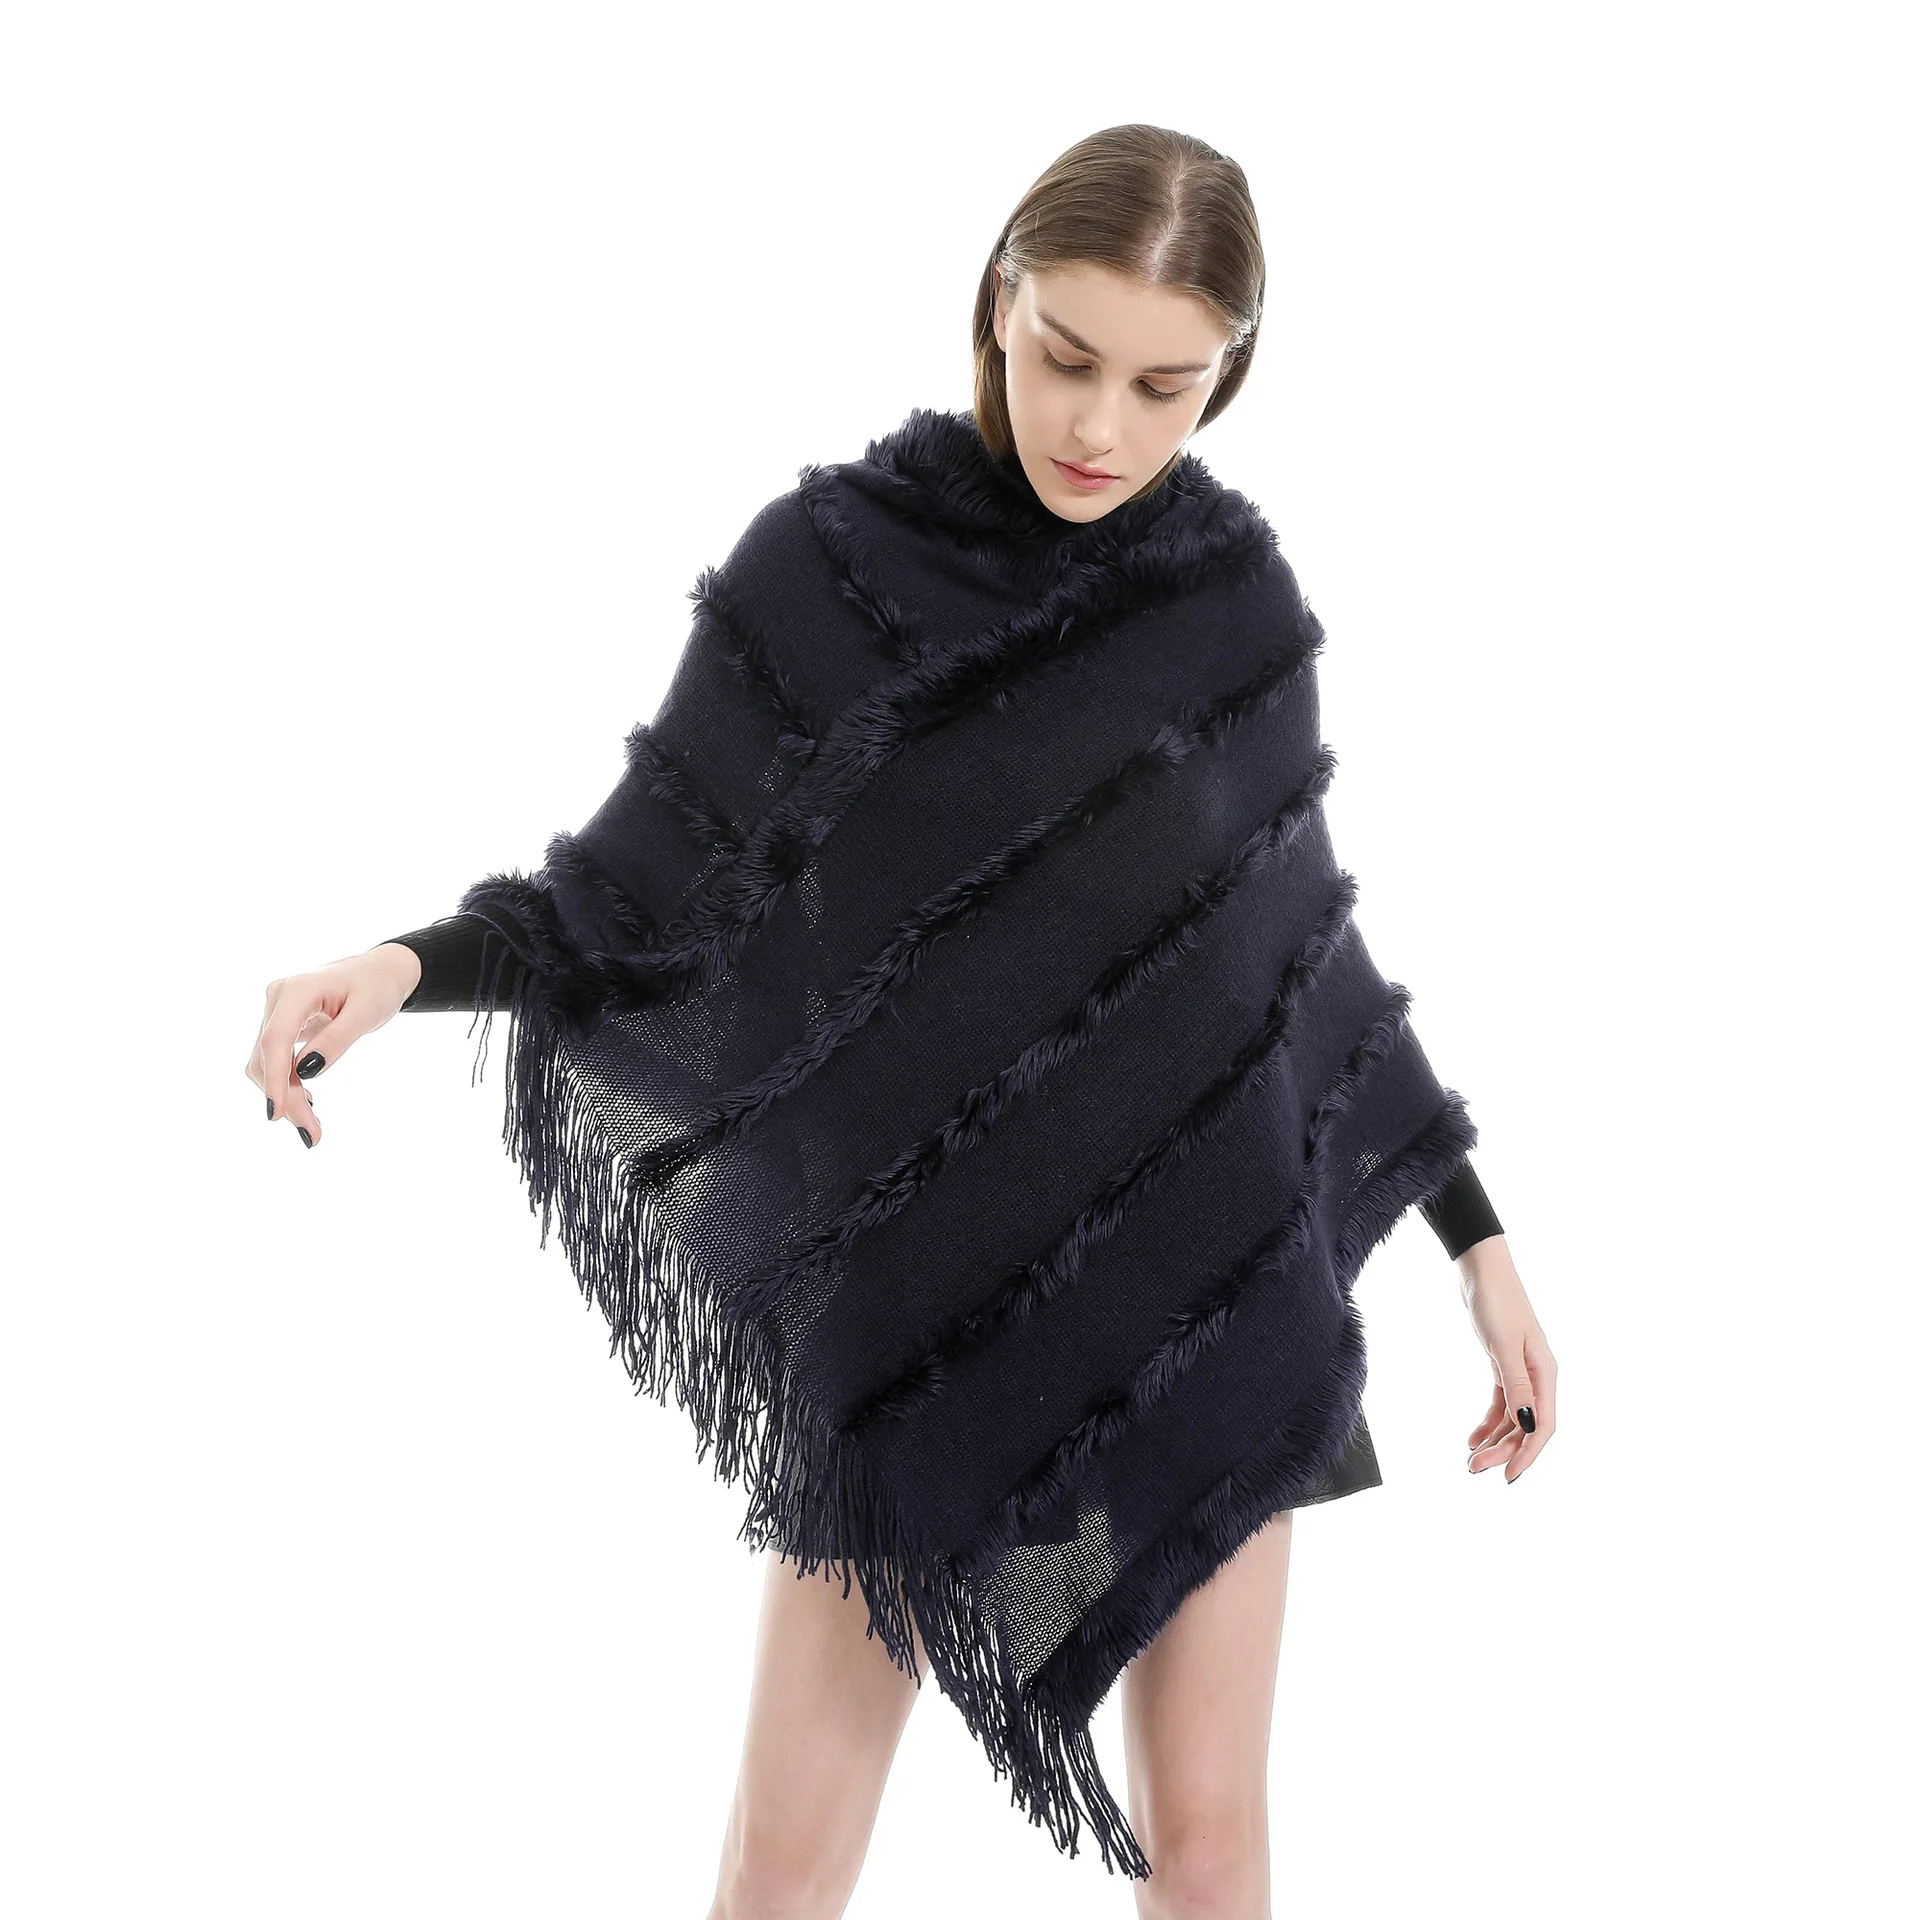 Autumn Winter Knitted Poncho Women Fur Hooded Ponchos and Capes Outdoor  Wear Fashion Blanket Coat Warm Sweater Pullover Tassel _ - AliExpress Mobile